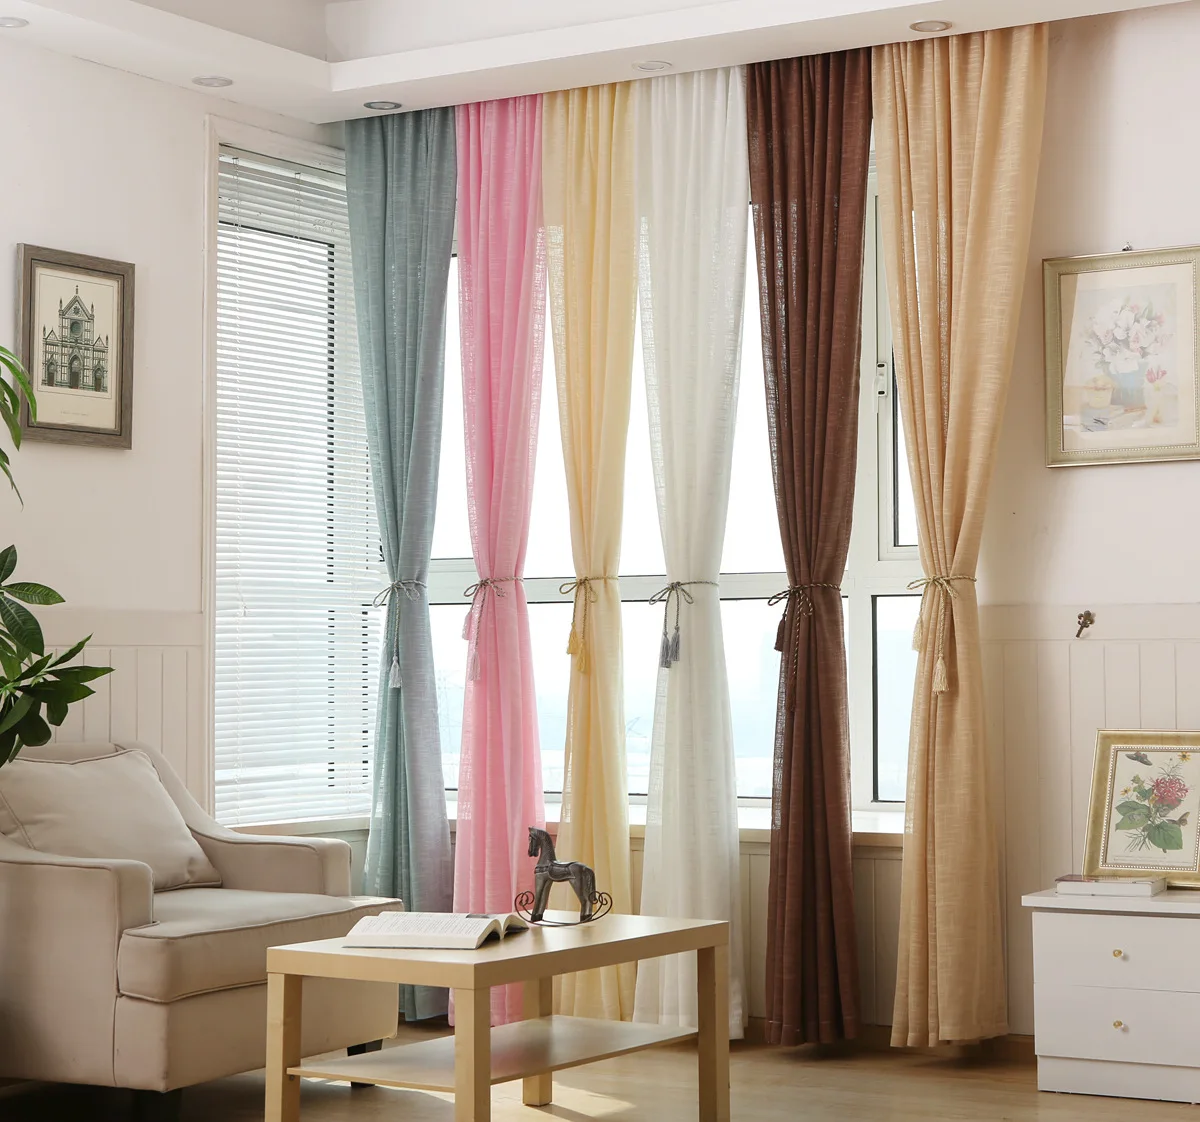 Slow Soul Thickened Linen Yarn Tulle Japanese And Korean Curtains For Living Room Bedroom White Window Curtain Kitchen Drapes